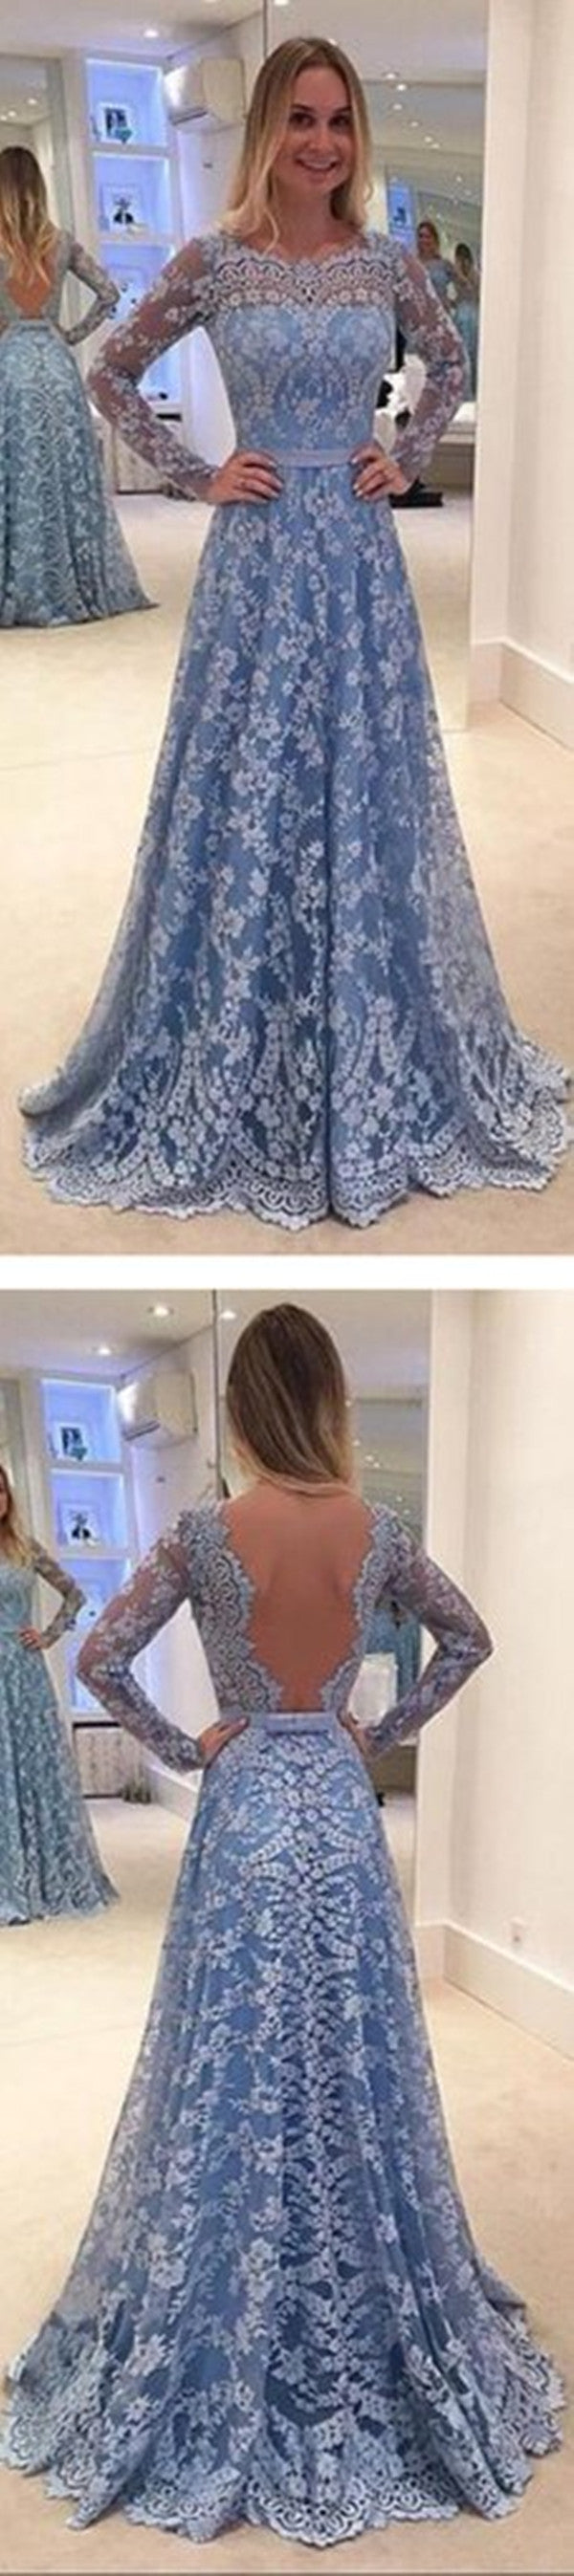 Lace Long Sleeves A-line Formal Cocktail Party Evening Prom Dress